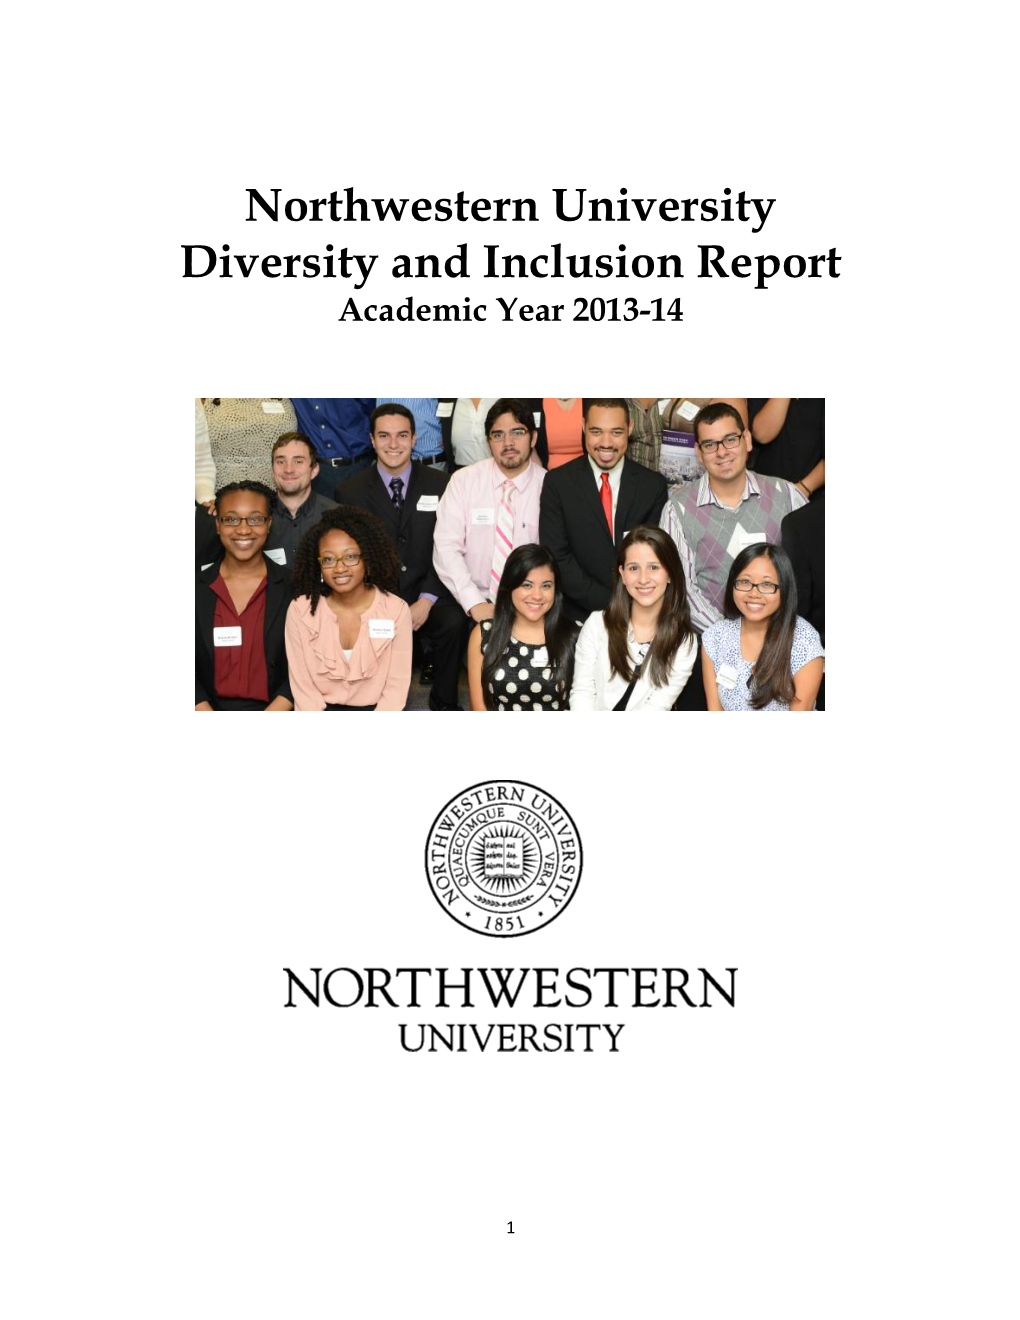 2013-14 Diversity and Inclusion Report